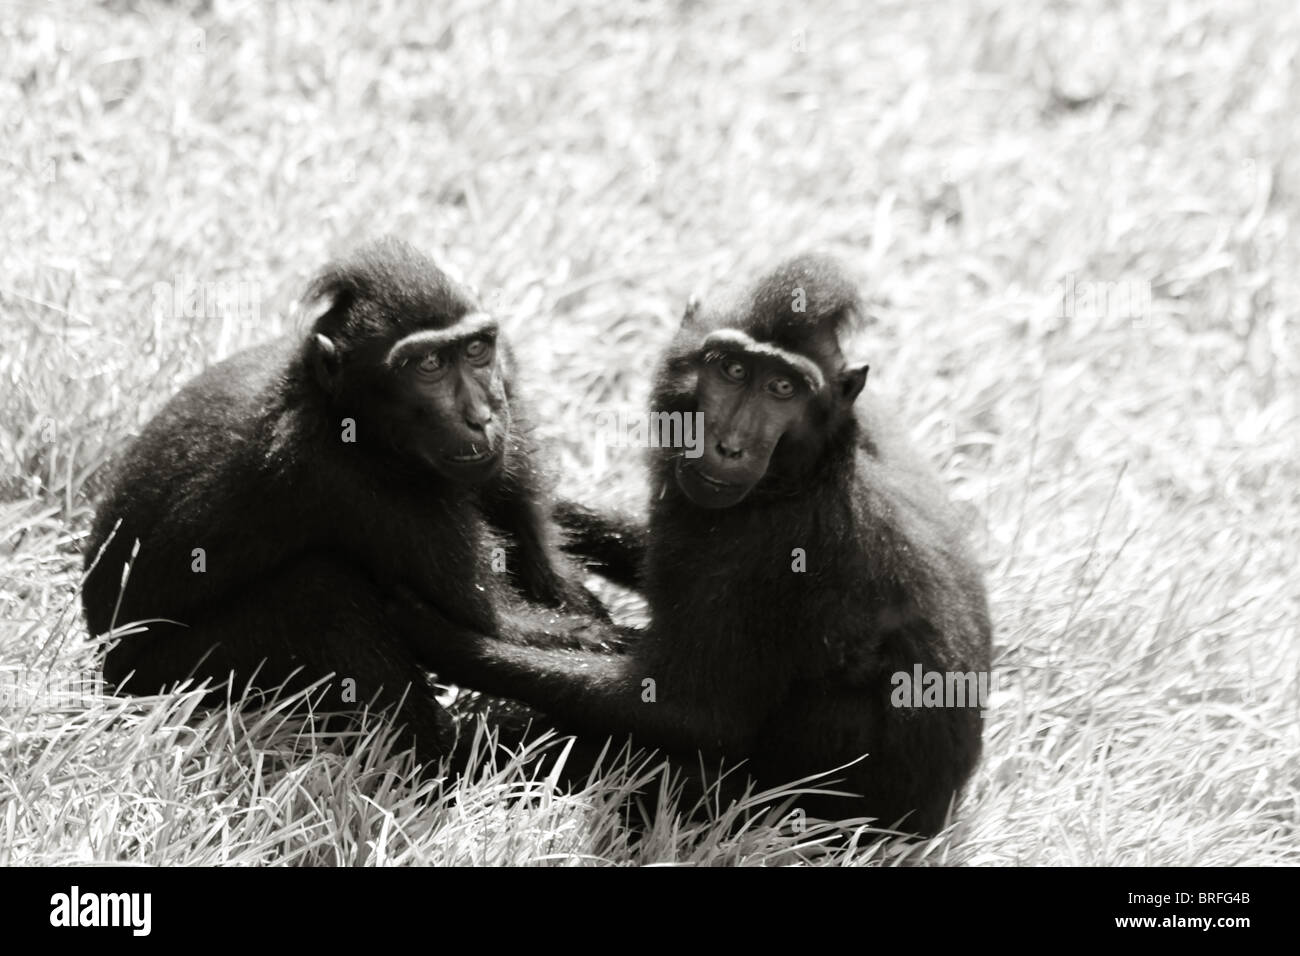 two monkeys holding each other Stock Photo